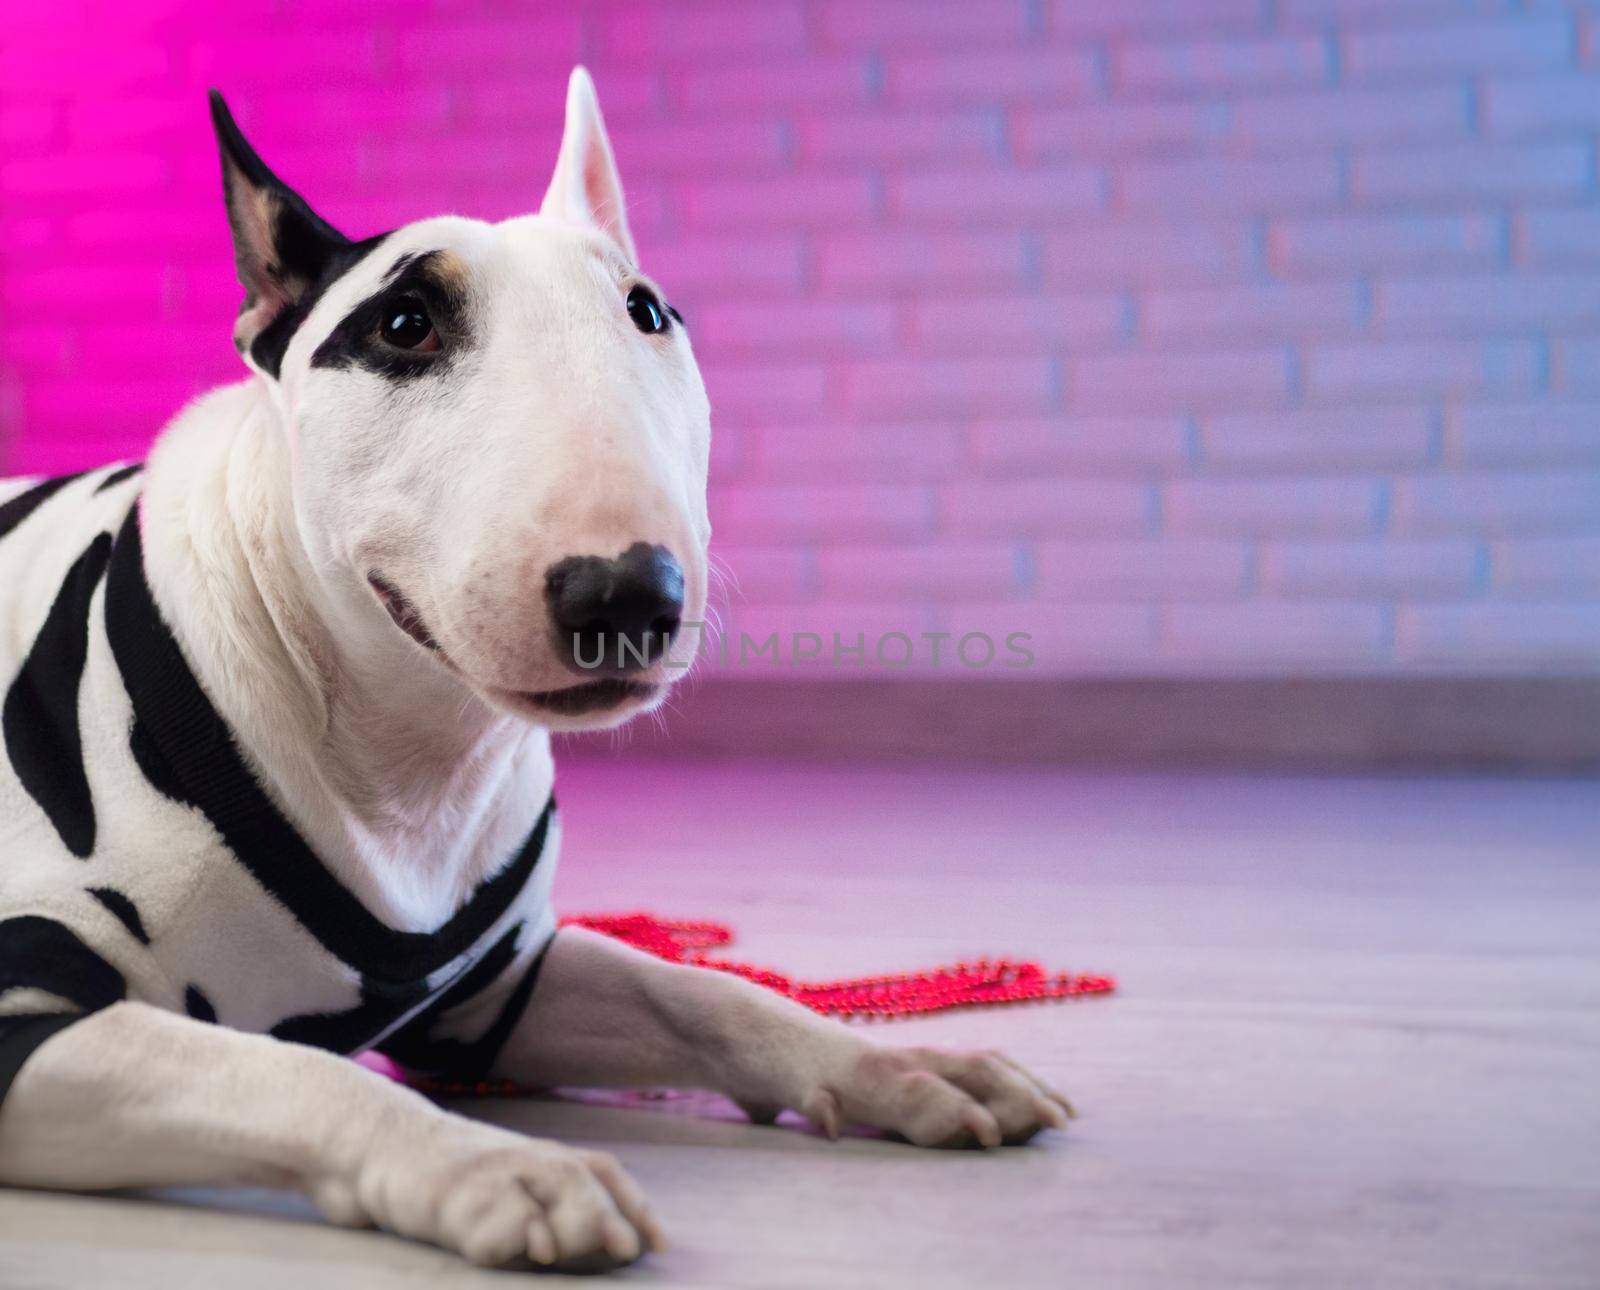 a white bull terrier in spotted dog clothes against a brick wall in neon pink and blue tones by Rotozey